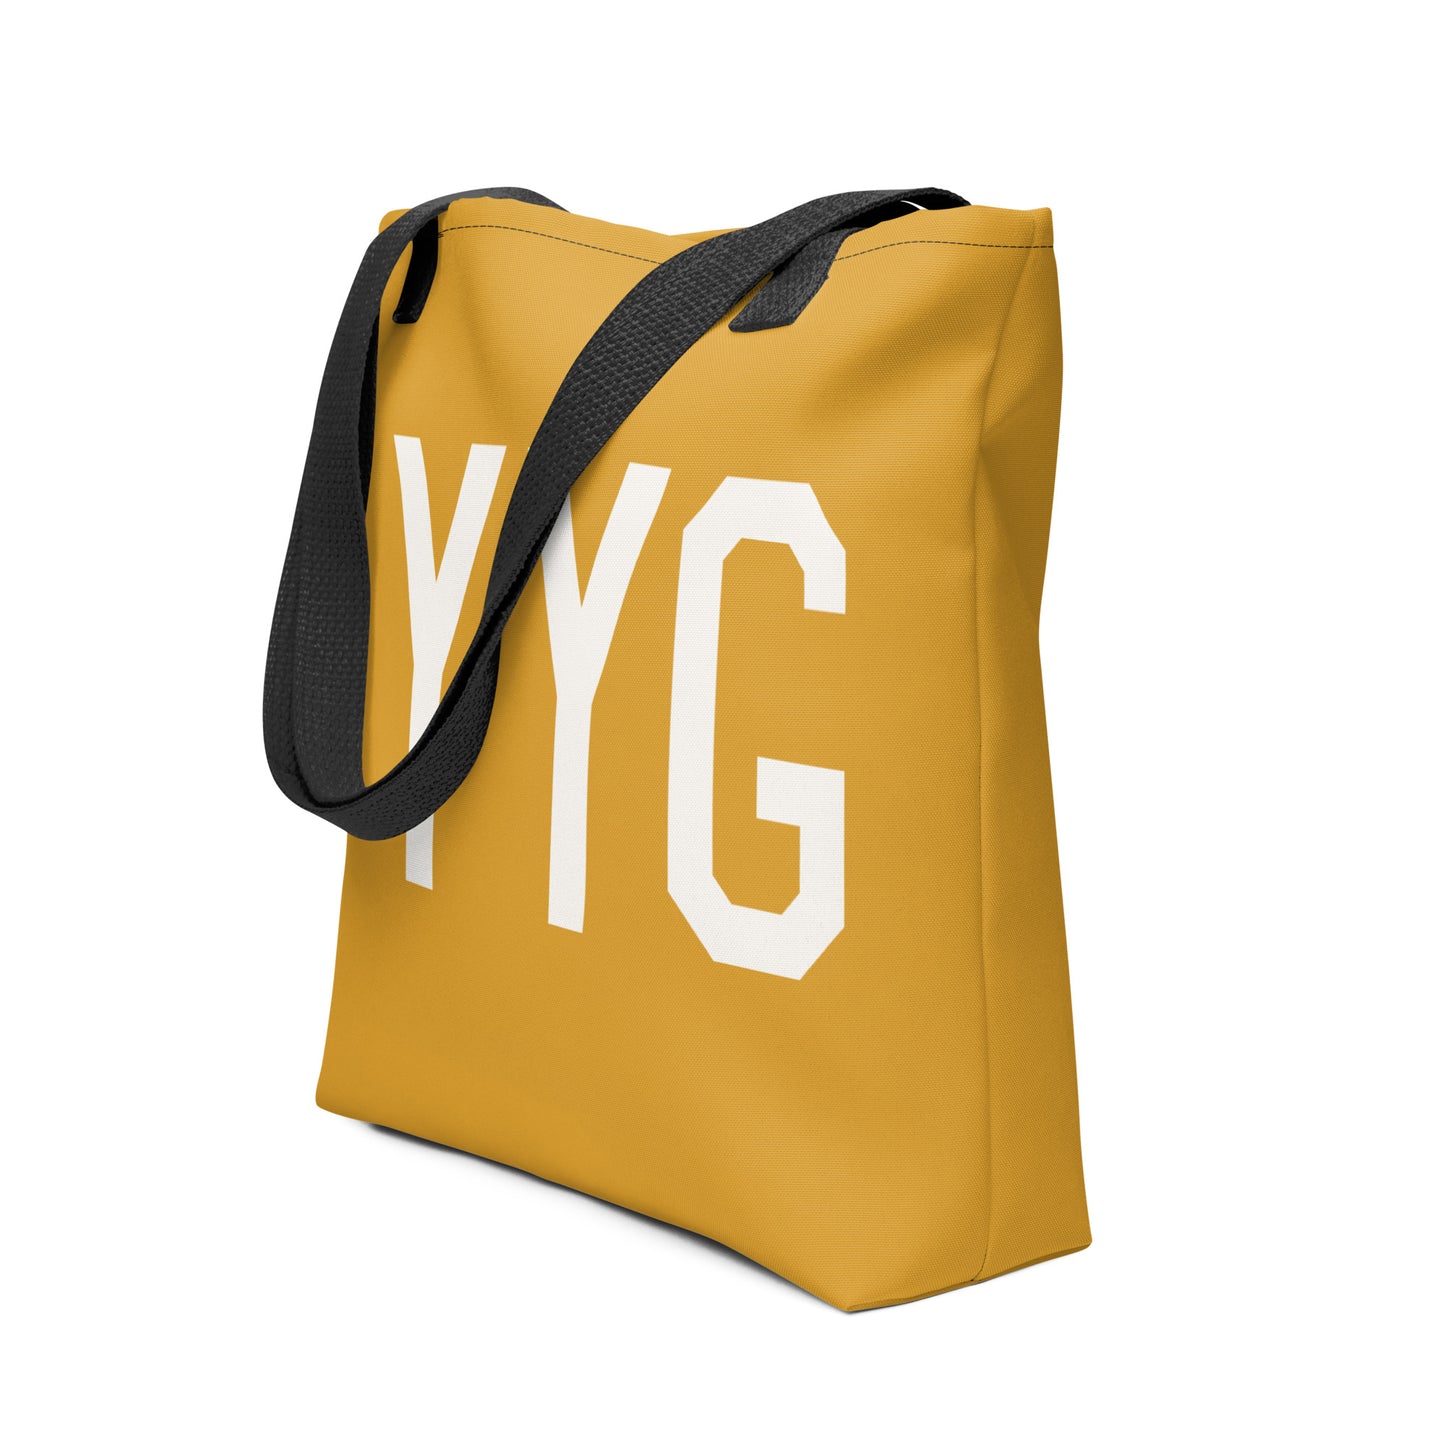 Airport Code Tote - Buttercup • YYG Charlottetown • YHM Designs - Image 05